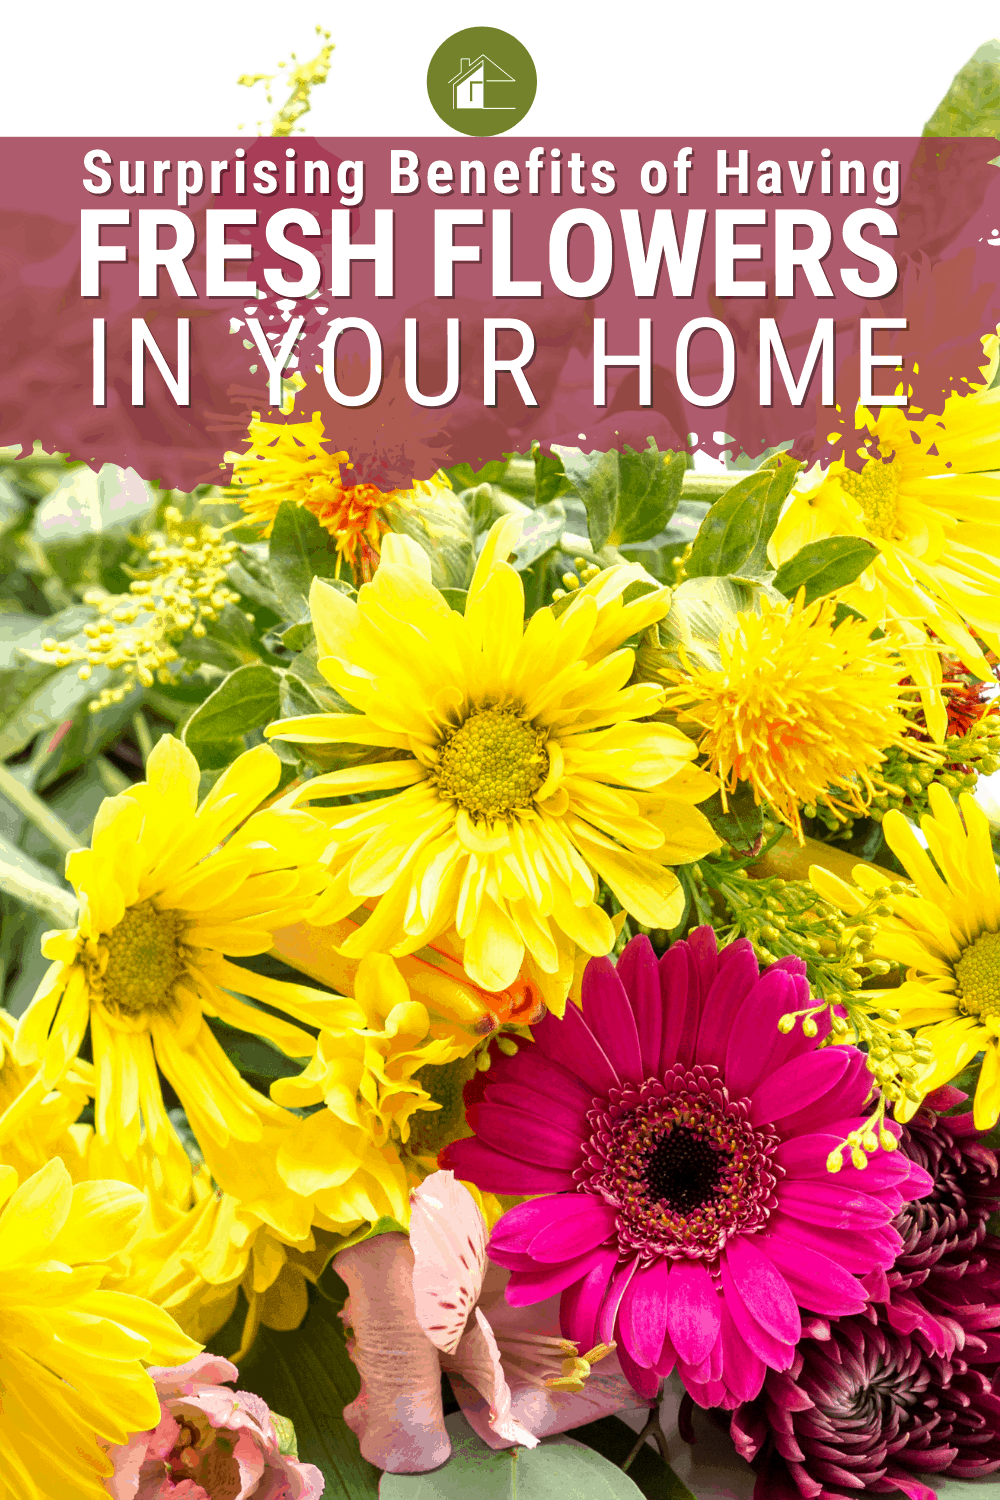 Find out some surprising benefits of having fresh flowers in your home. This article tells you all about it, from the health and wellness aspects to how they can improve your mood. #freshflowers via @mystayathome